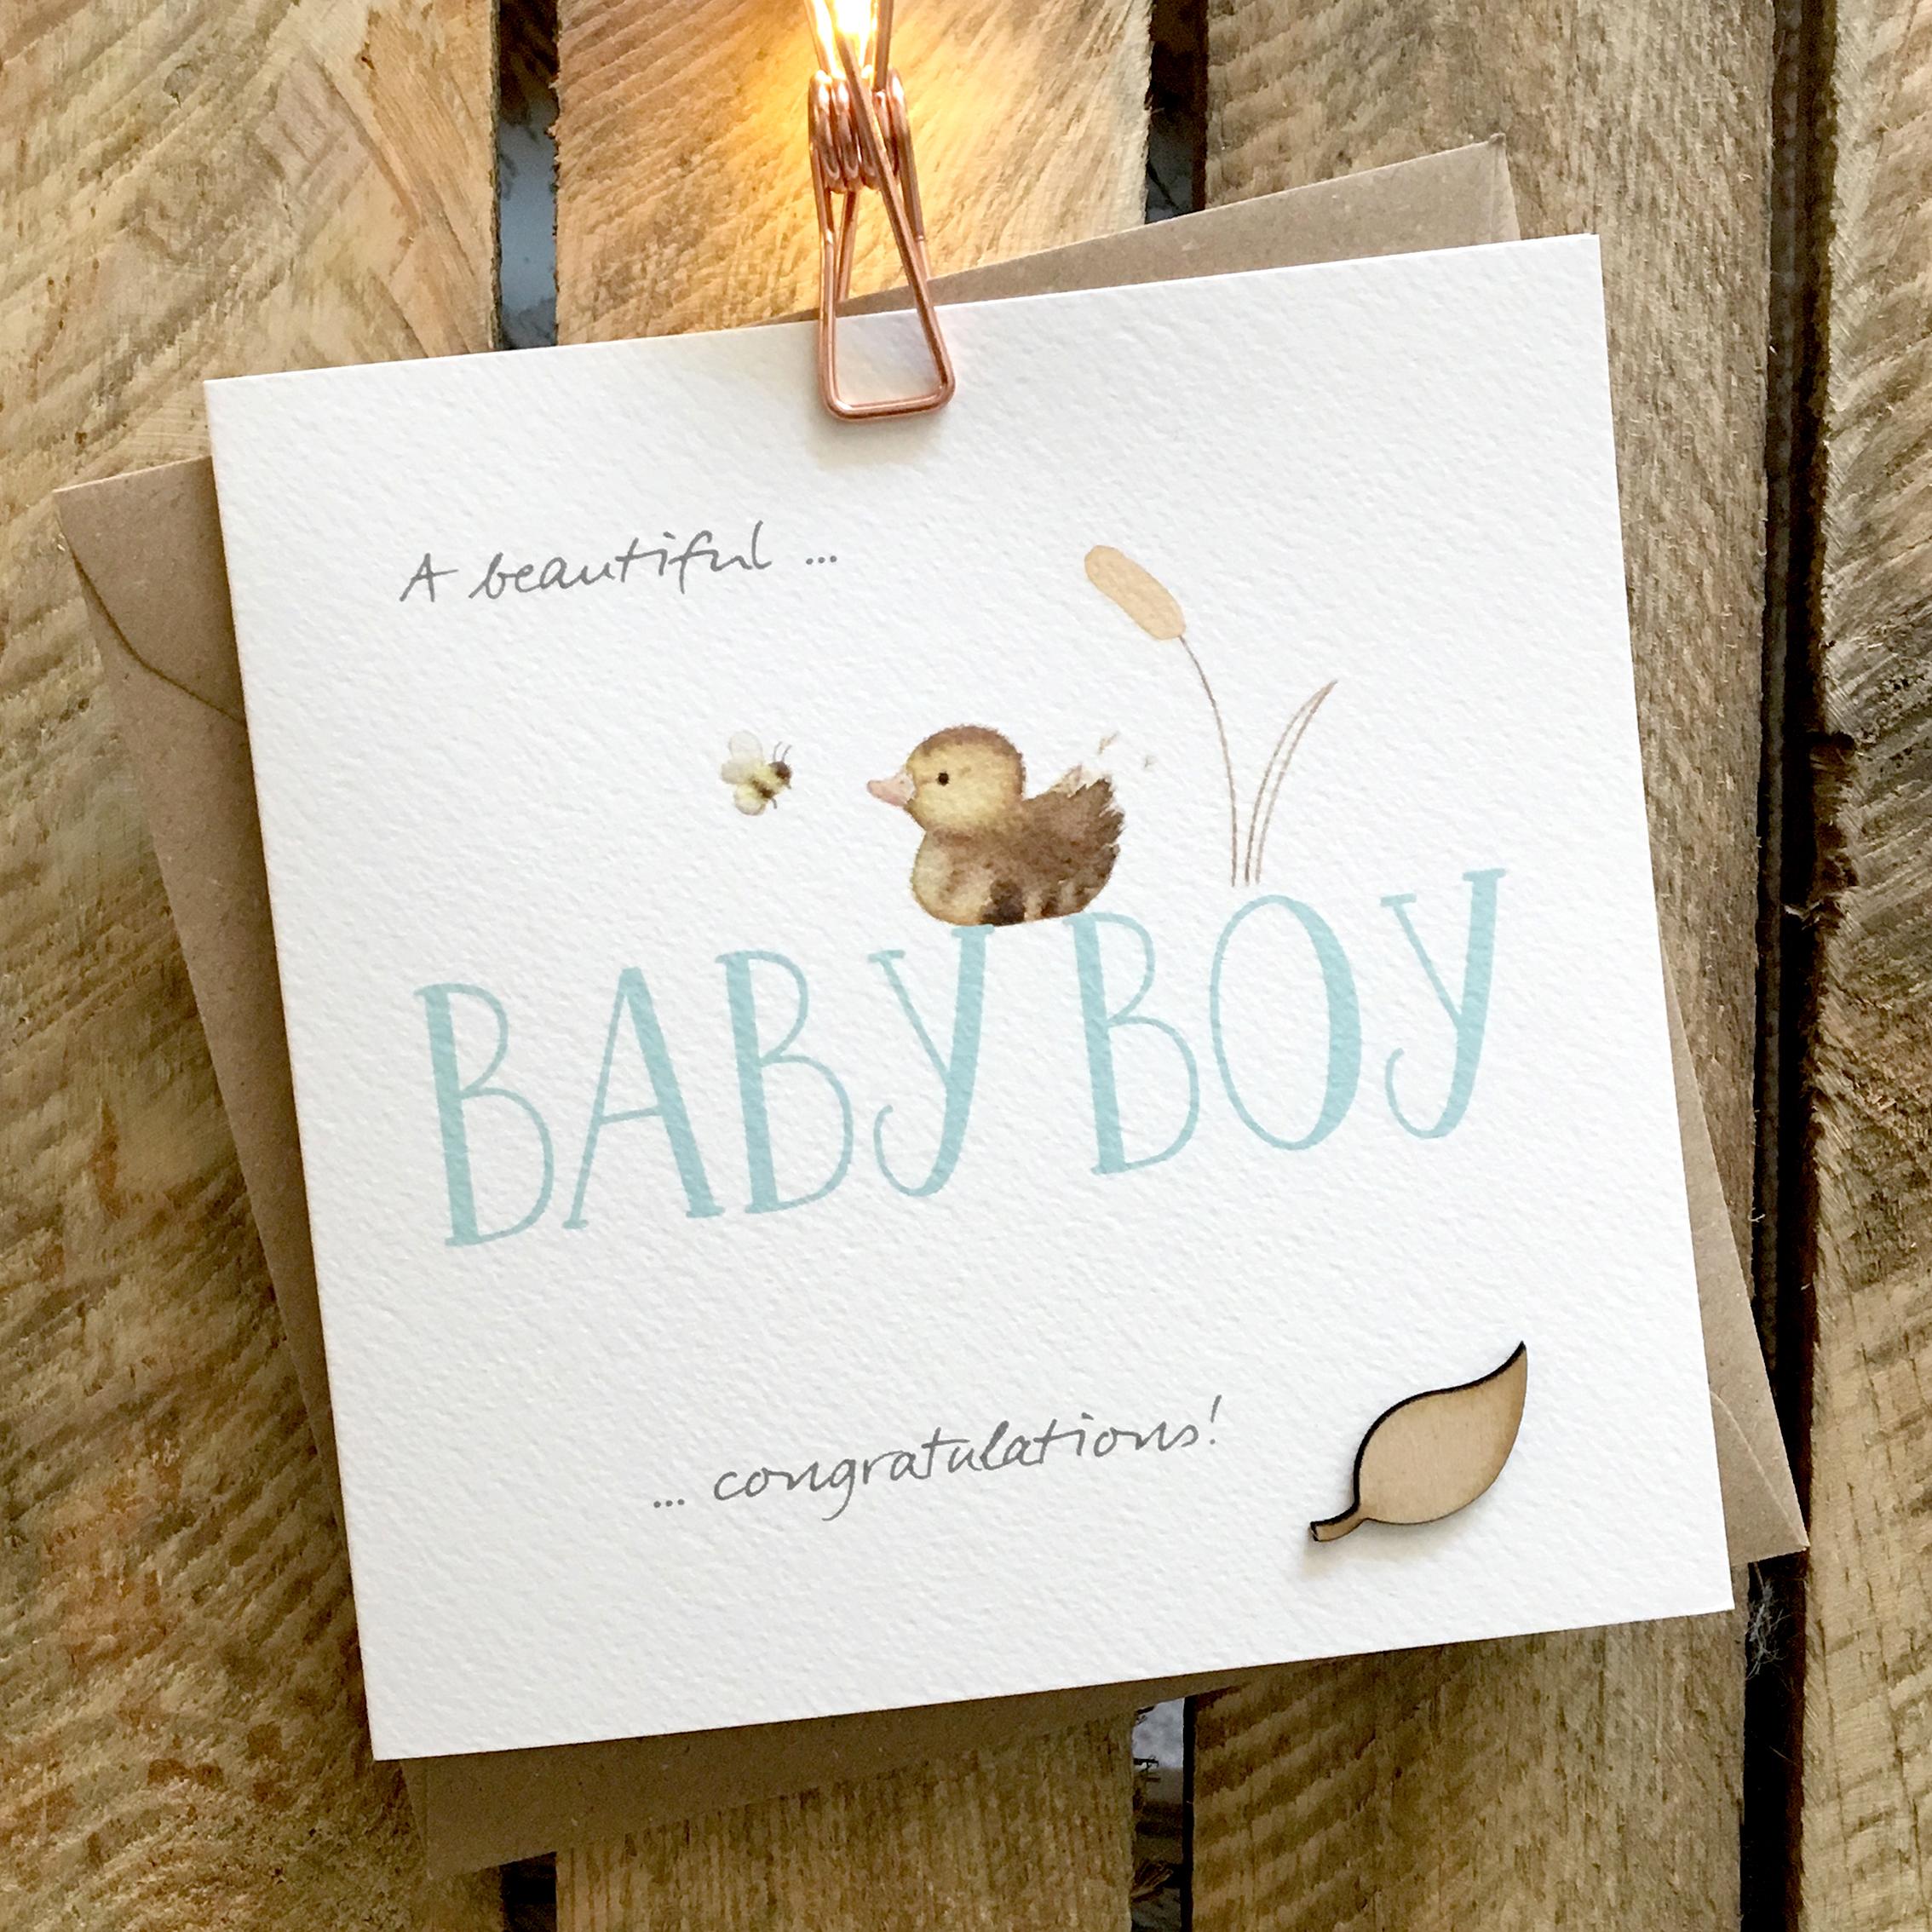 Card featuring a cute fluffy duckling and bumble bee sitting on top of a large blue BABY BOY caption